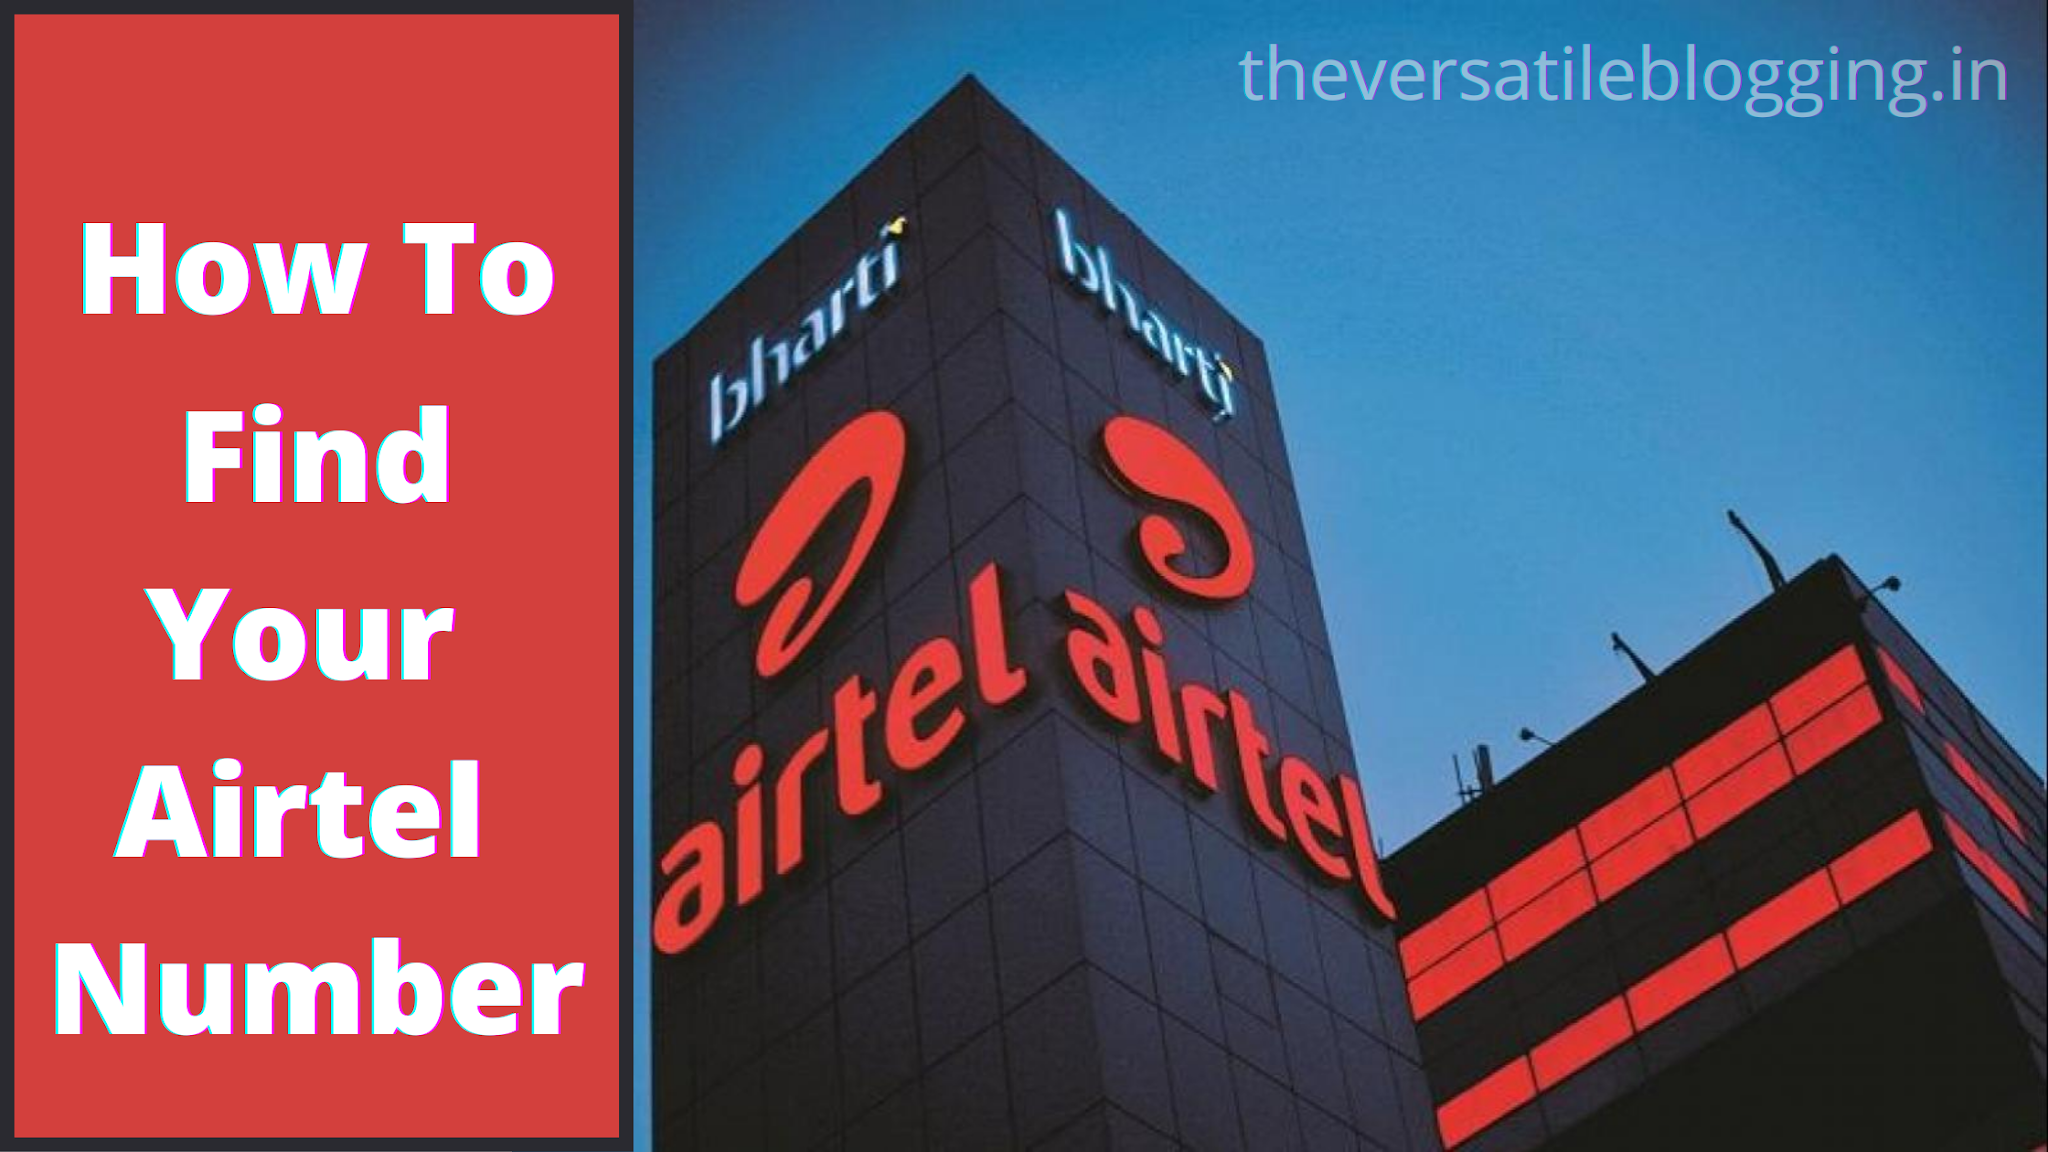 How to Know Who is Sharing Your Airtel Data - wide 9